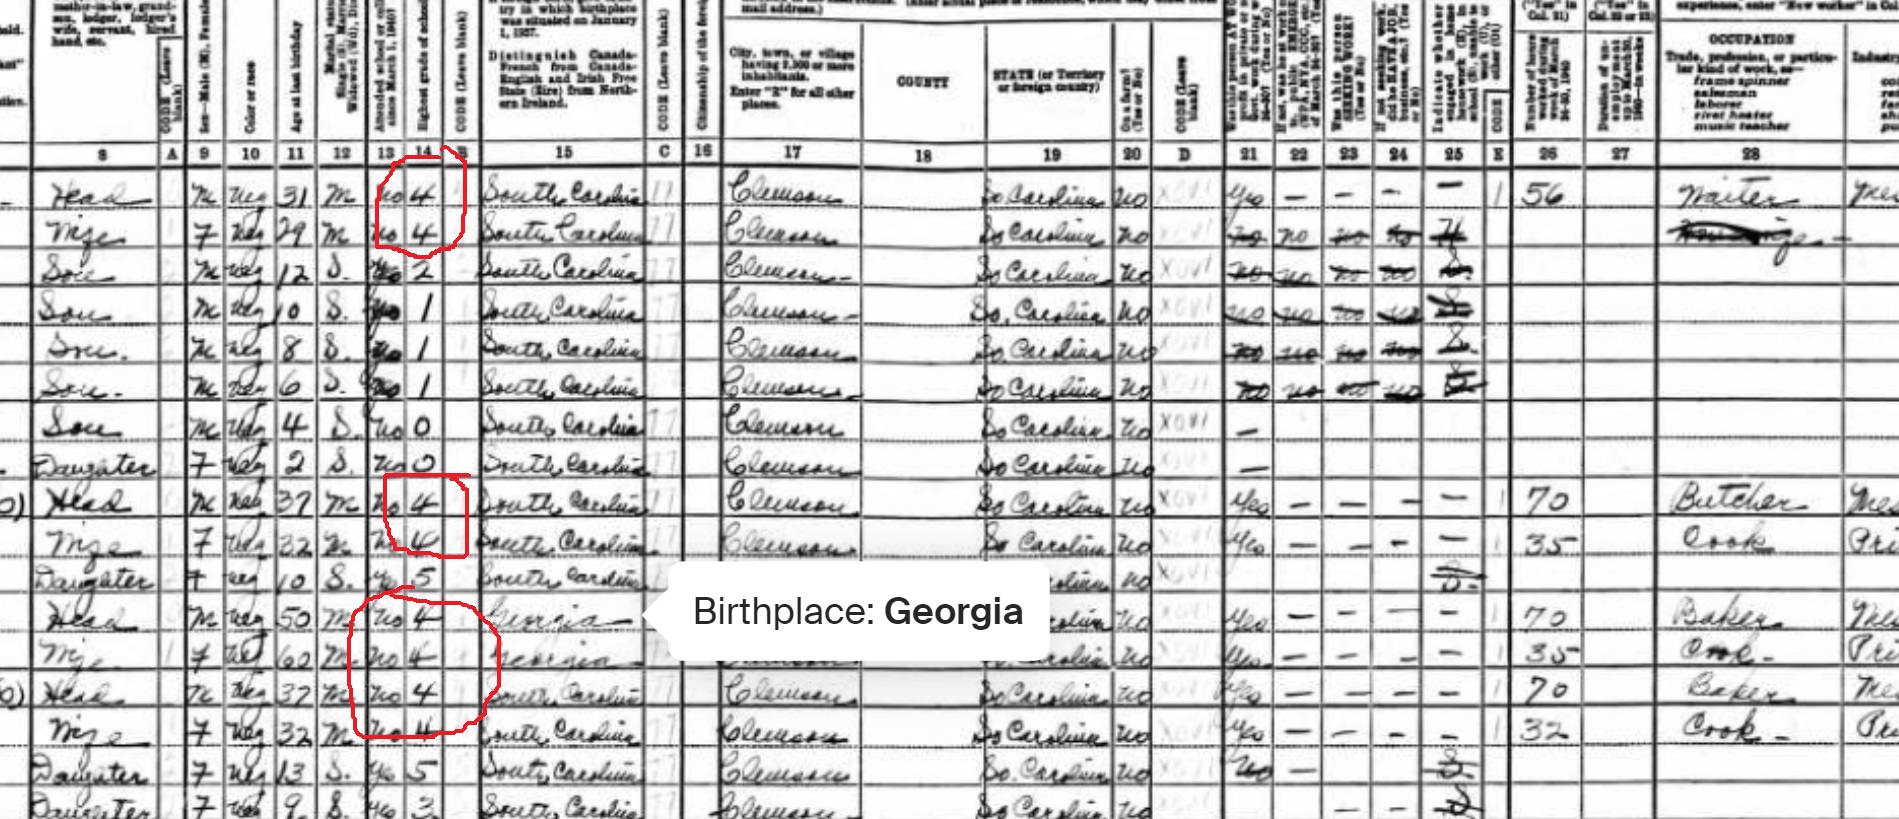 A screenshot of the census highlighting the number of individuals with a 4th grade education